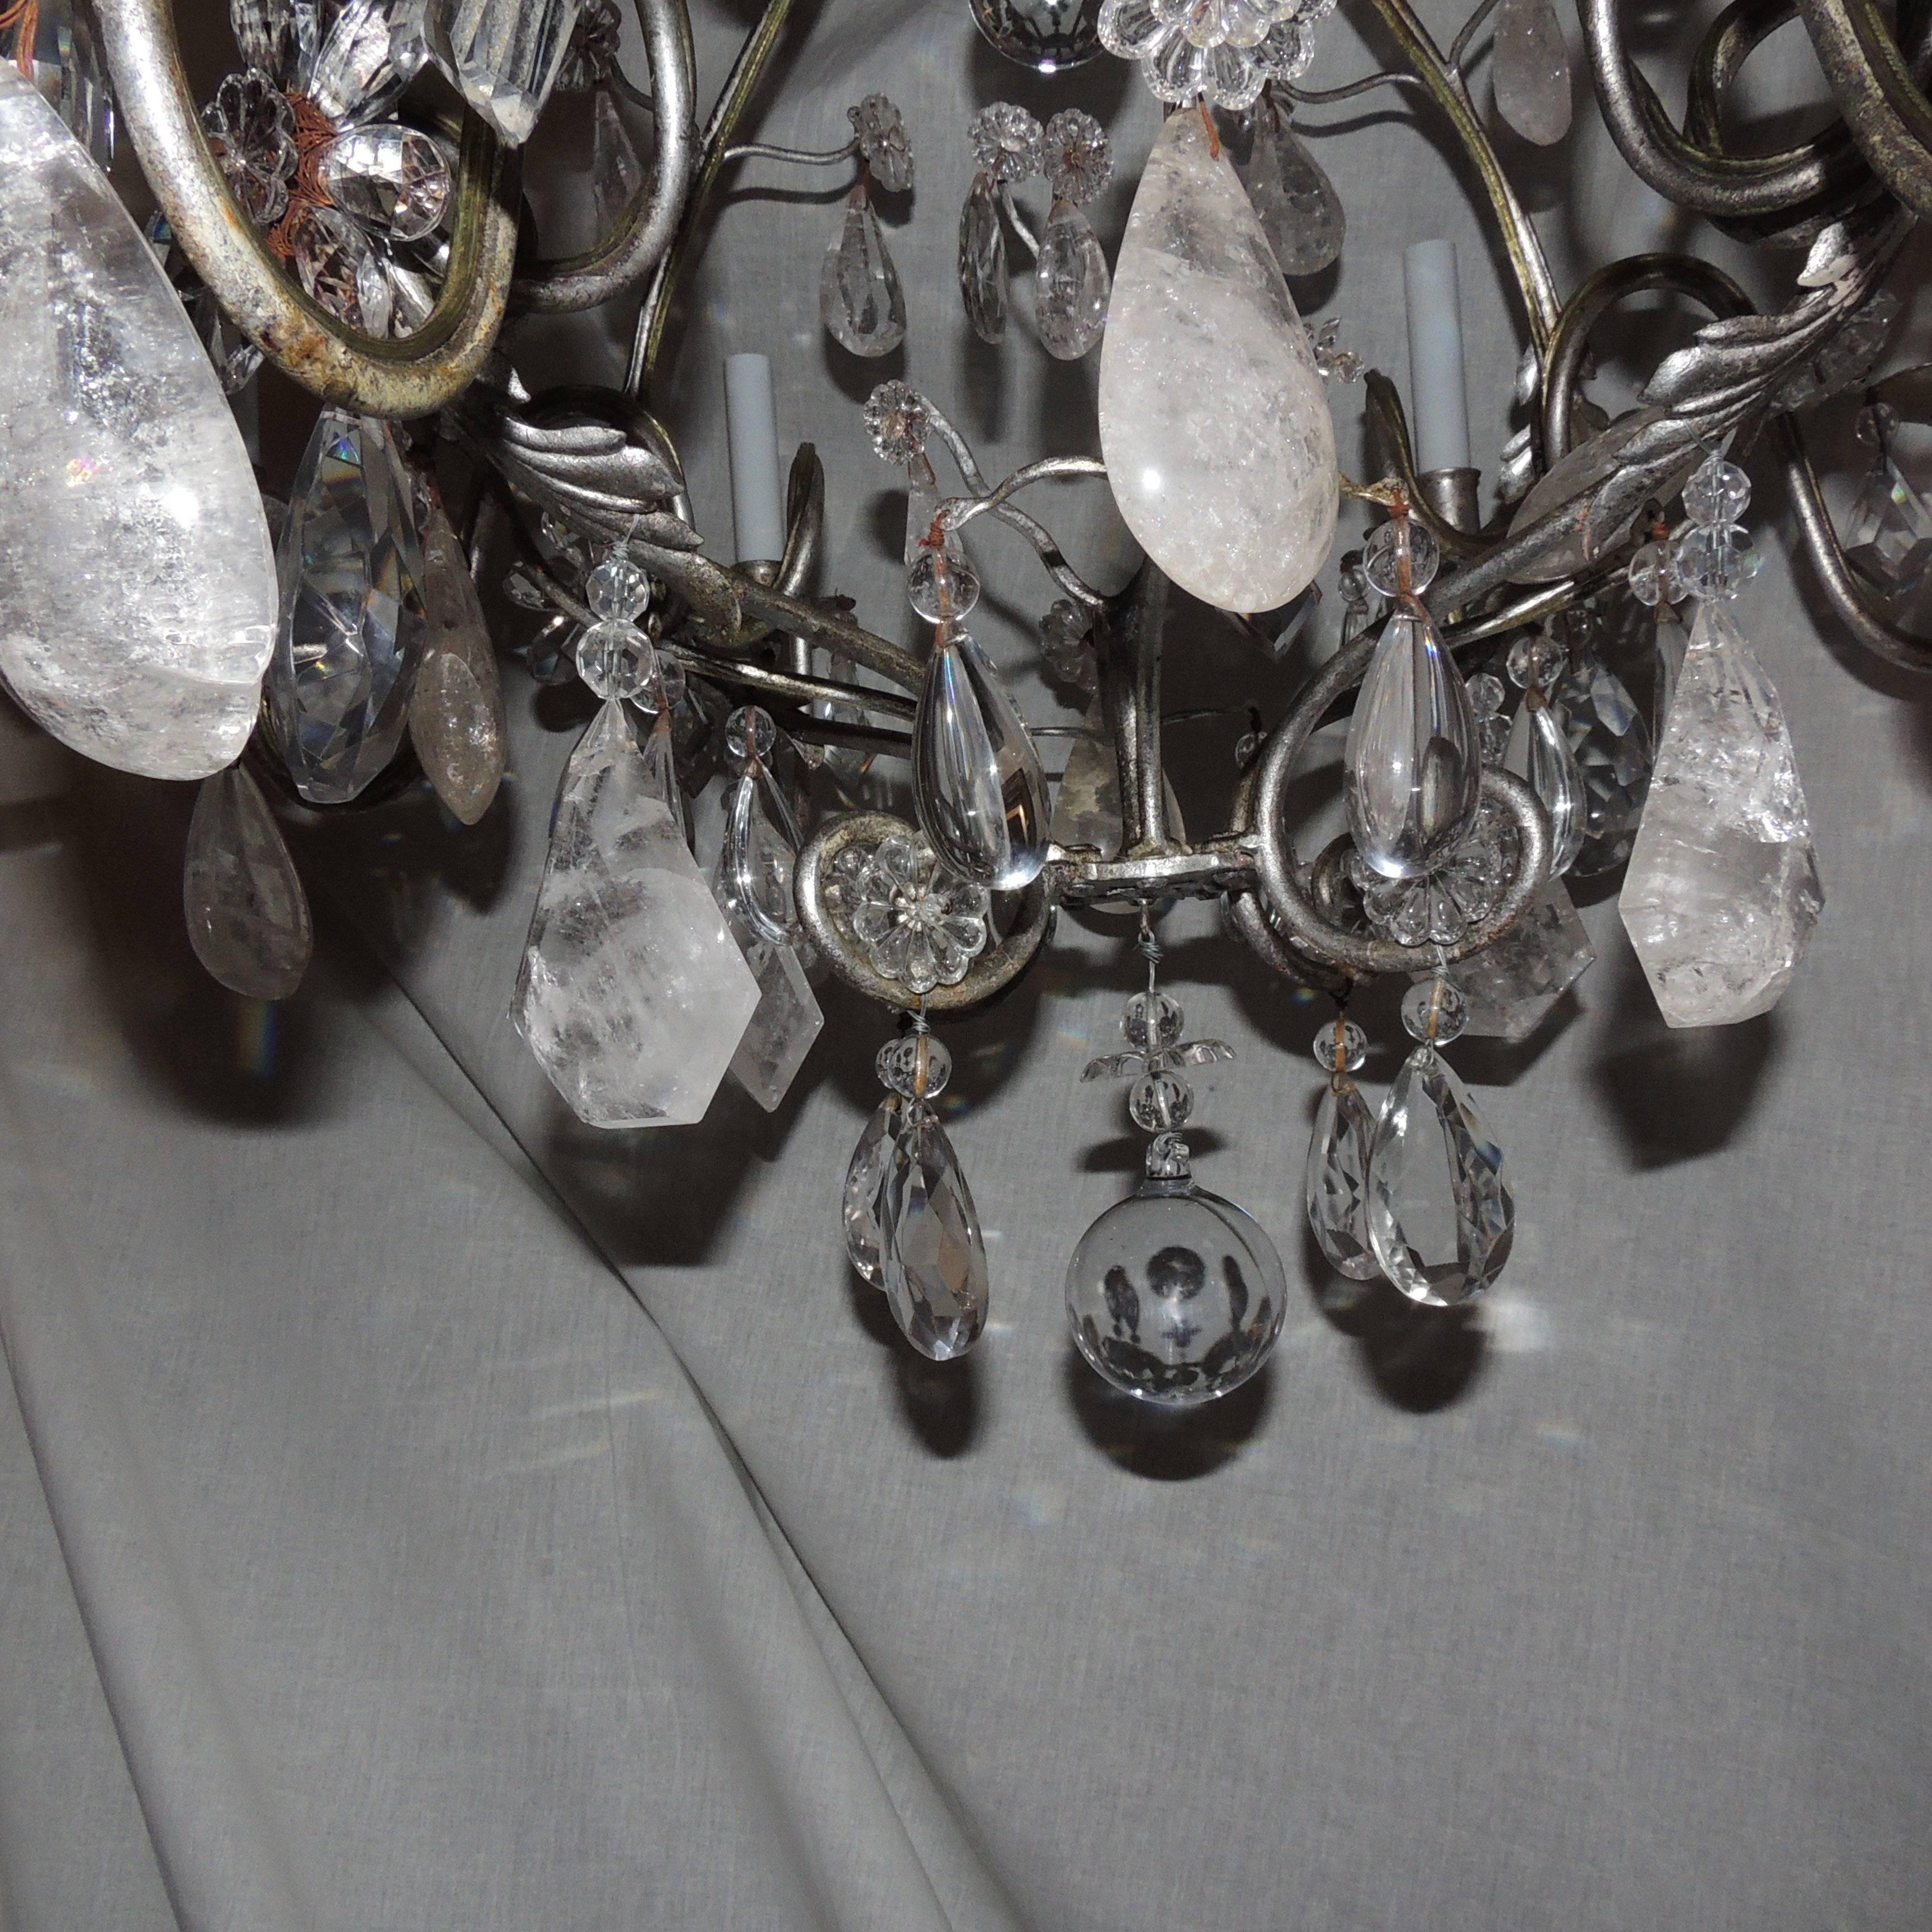 Transitional Silvered Gilt Bagues Eight-Light Rock Crystal Jansen Chandelier In Good Condition For Sale In Roslyn, NY